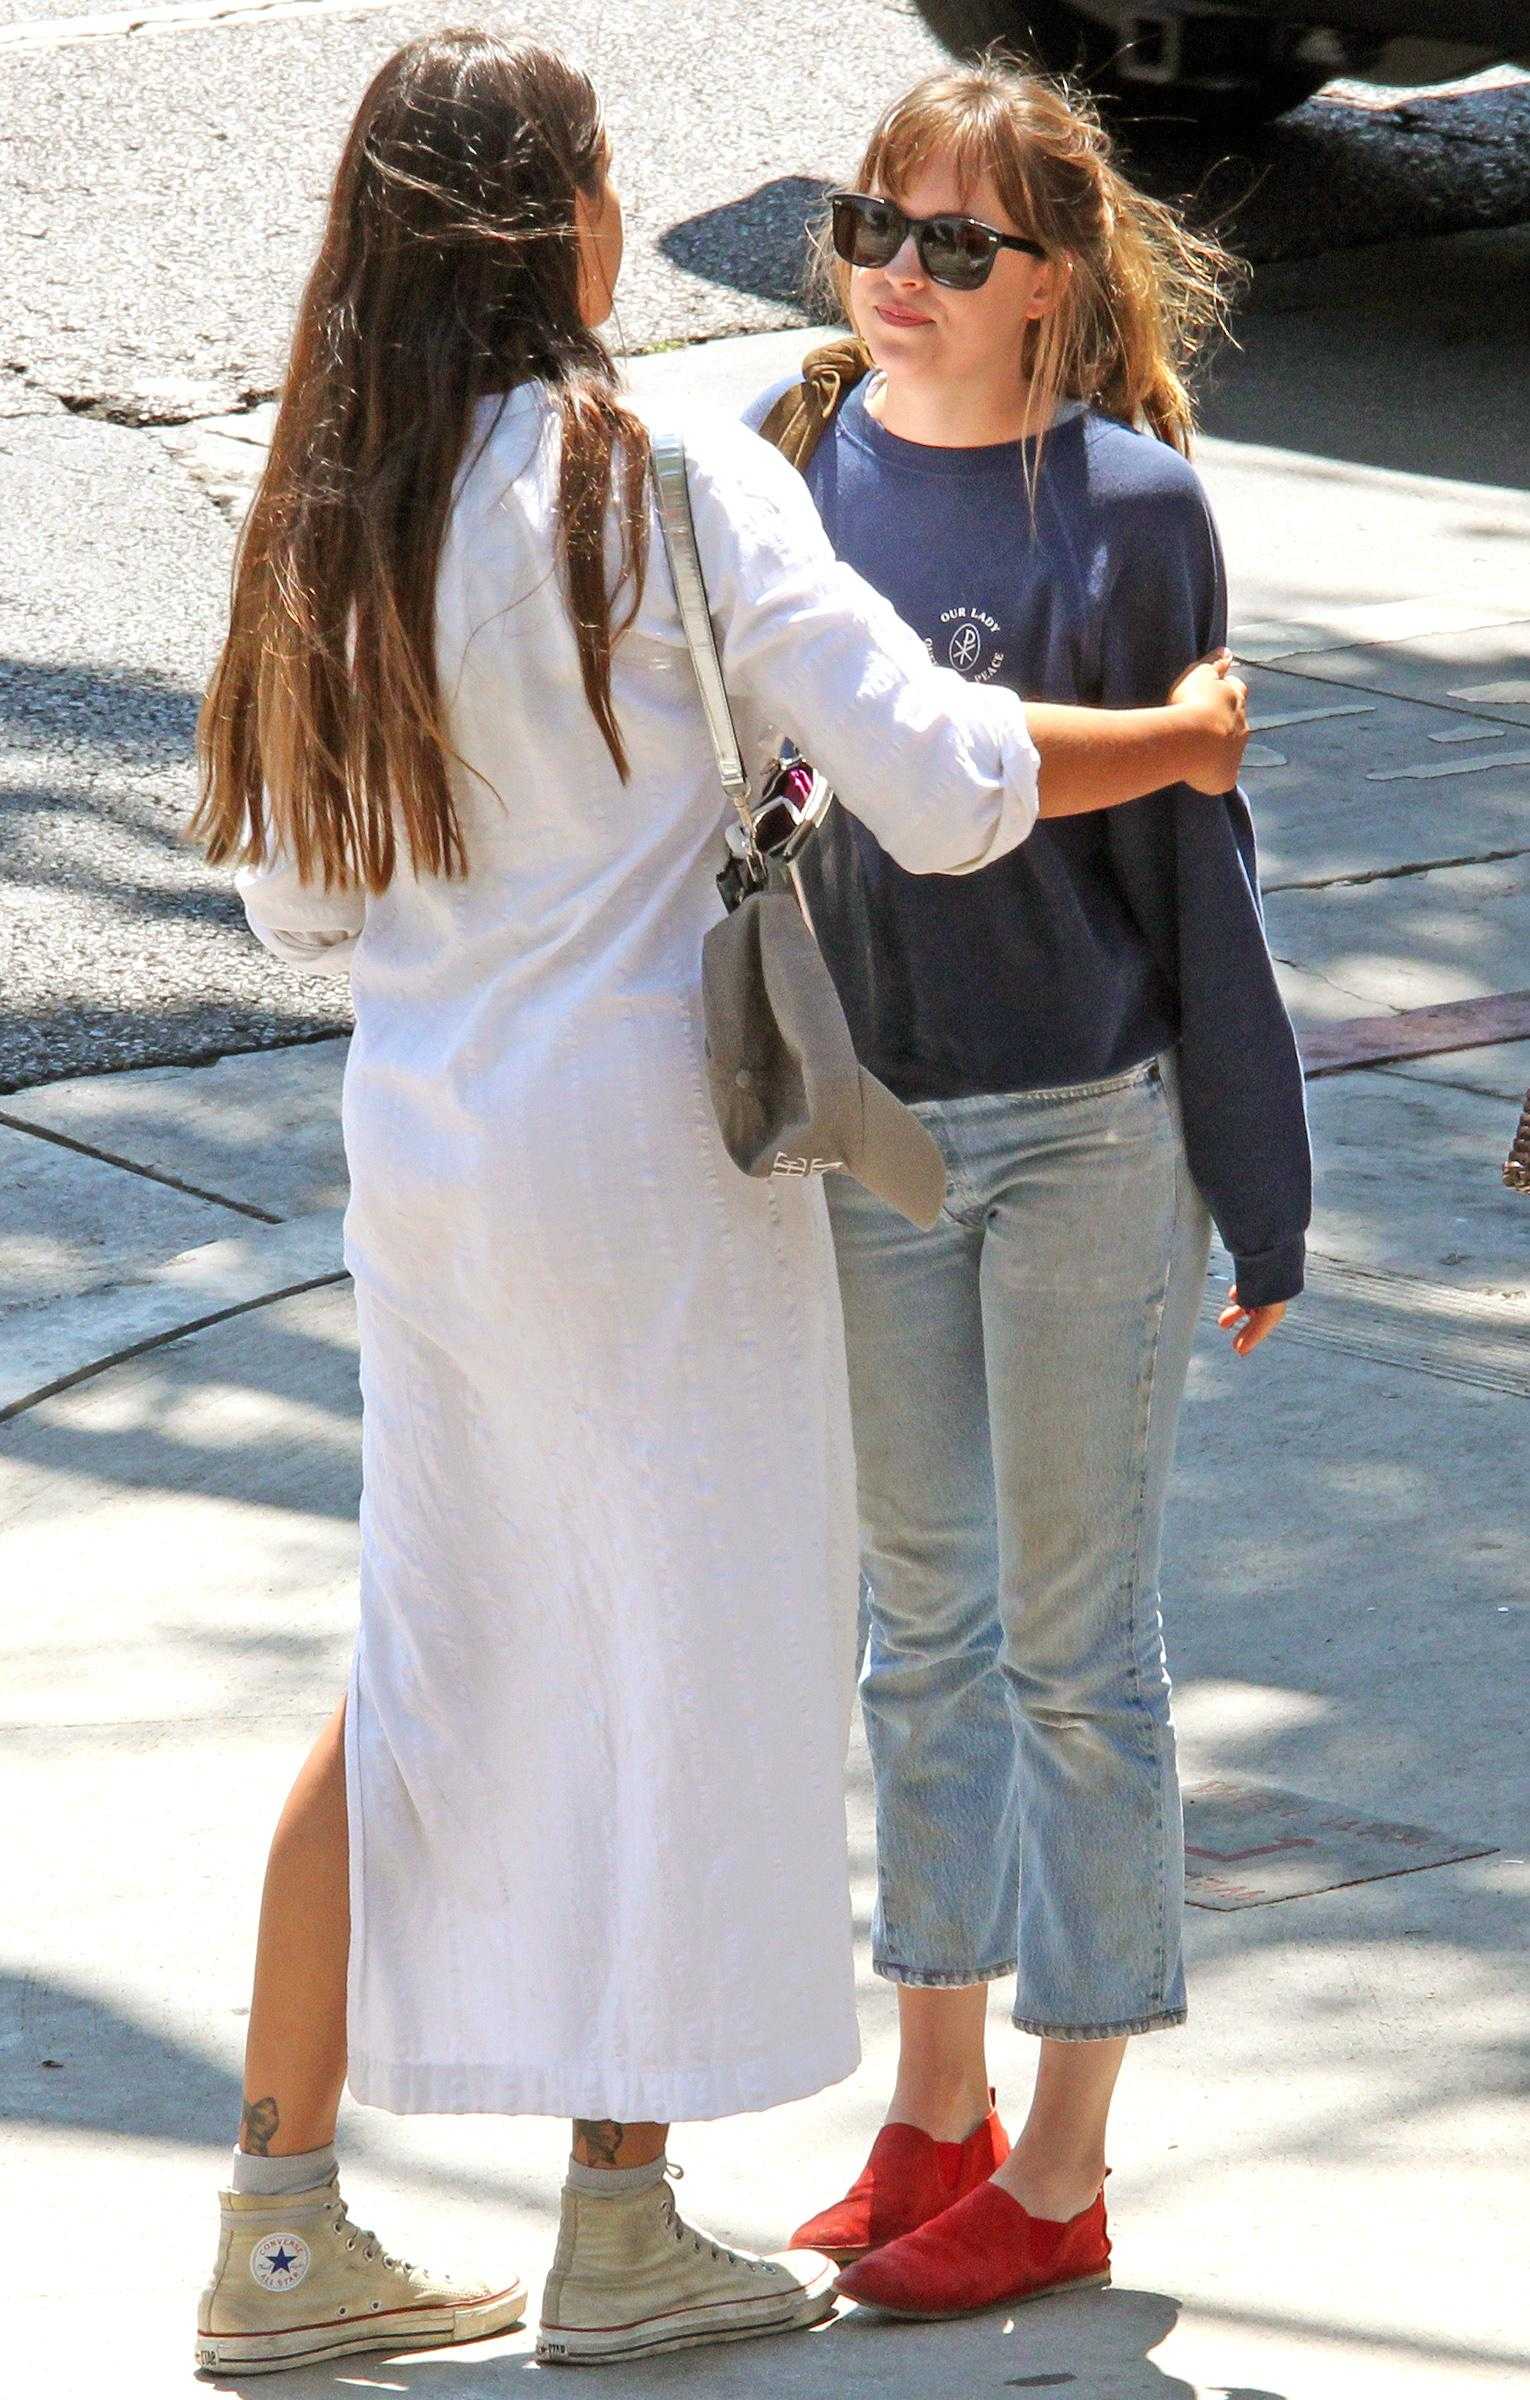 Dakota_Johnson_-_Goes_for_lunch_and_shopping_in_Los_Angeles_on_August_22-12.jpg